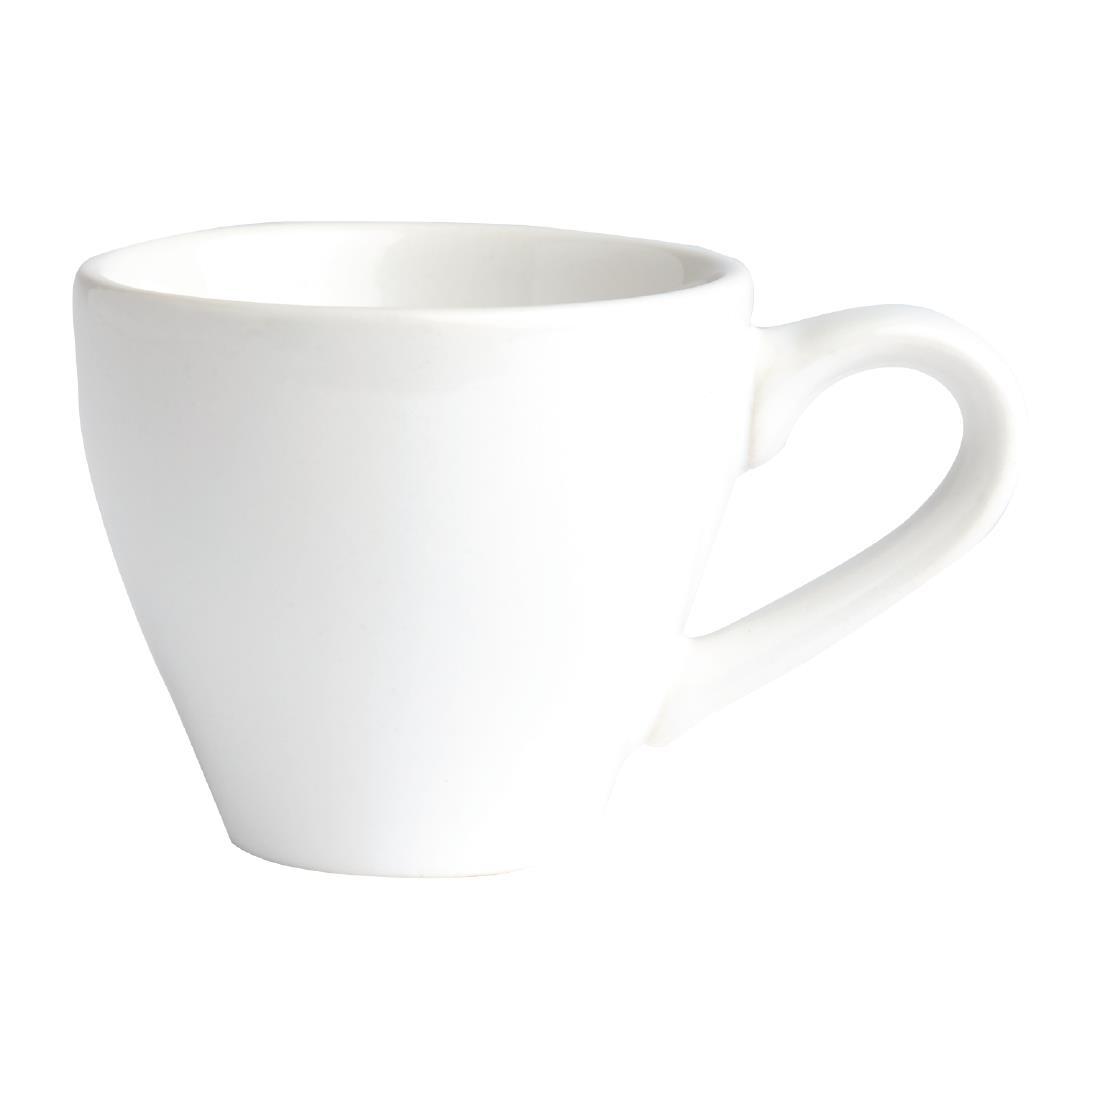 Olympia Cafe Espresso Cups White 100ml (Pack of 12) - GK071  - 2